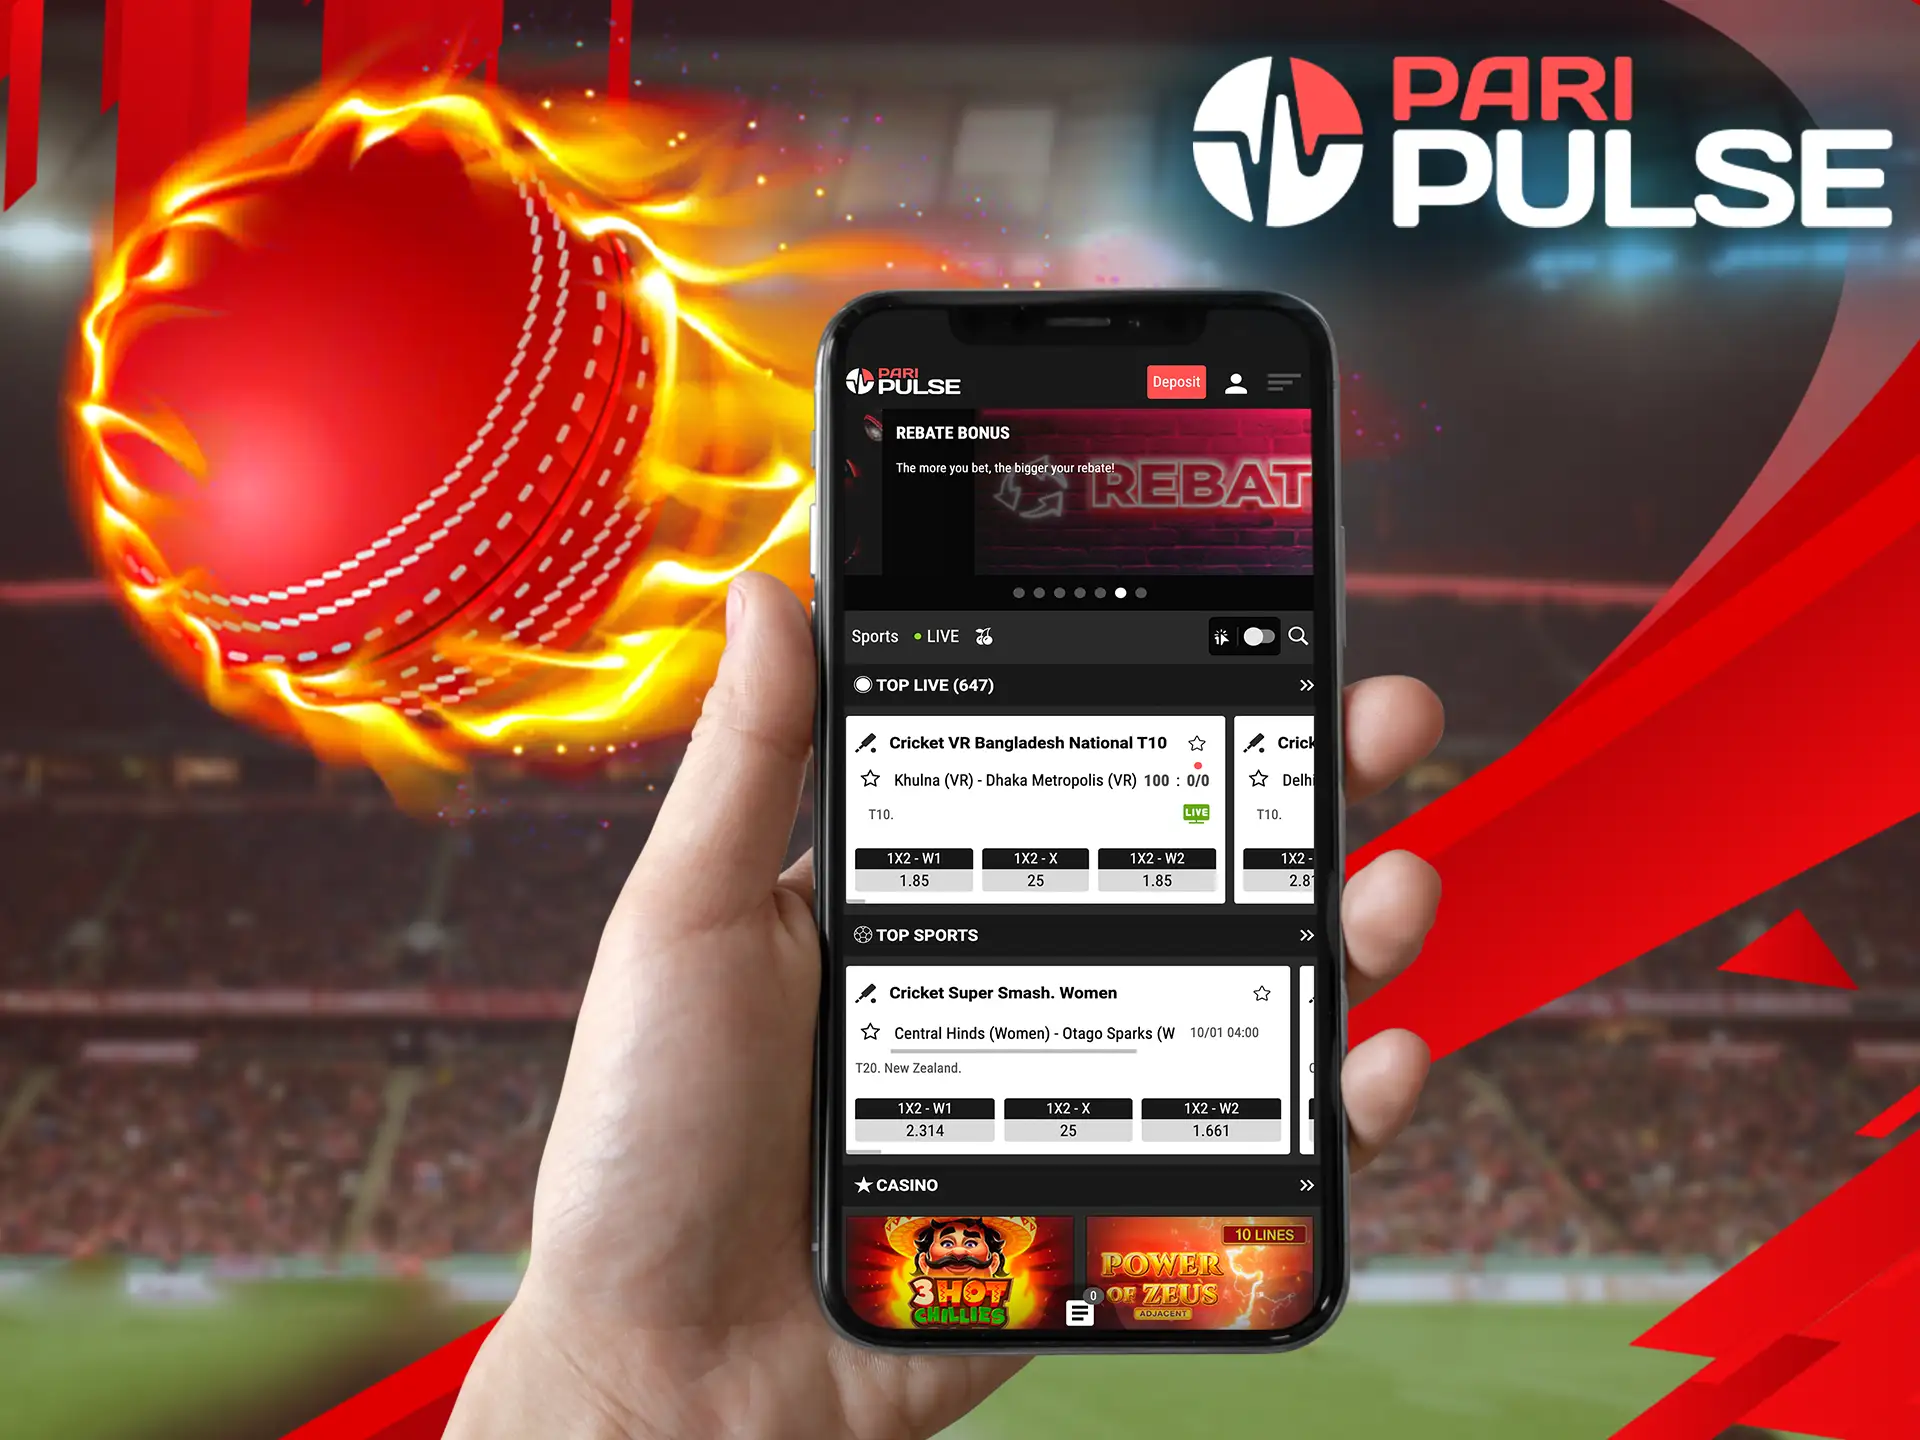 Many users do not know where to start the process of placing bets, they just need to register in PariPulse and deposit and you're in the game.